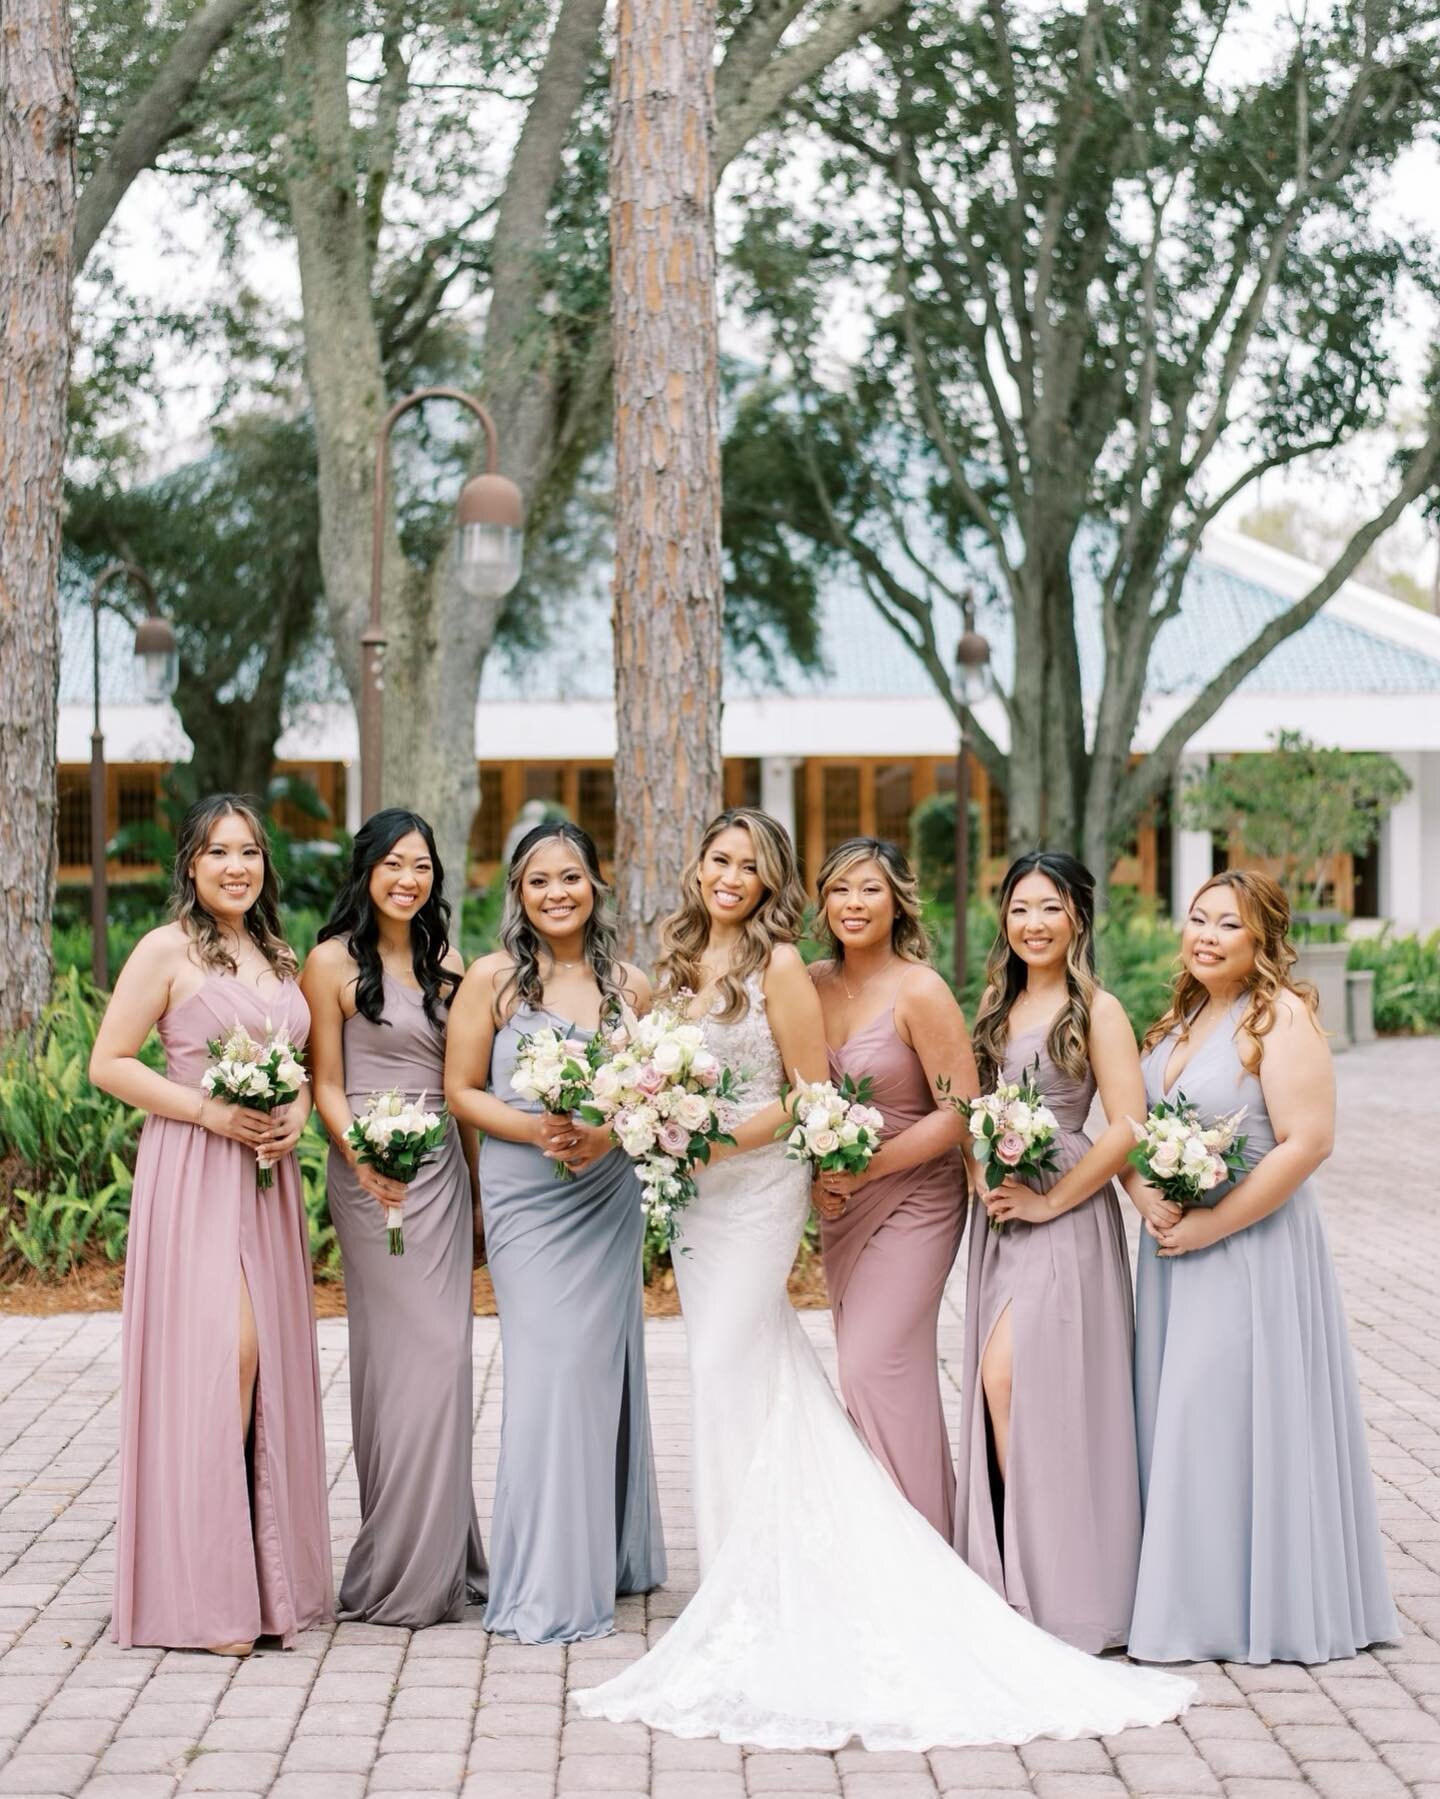 Congrats 👏🏽 Your wedding day is almost here!

You&rsquo;ve most likely already had your bridal trial with our team, but now it's time to think about your bridal party. While sometimes it&rsquo;s every gal for themselves, it&rsquo;s so important tha